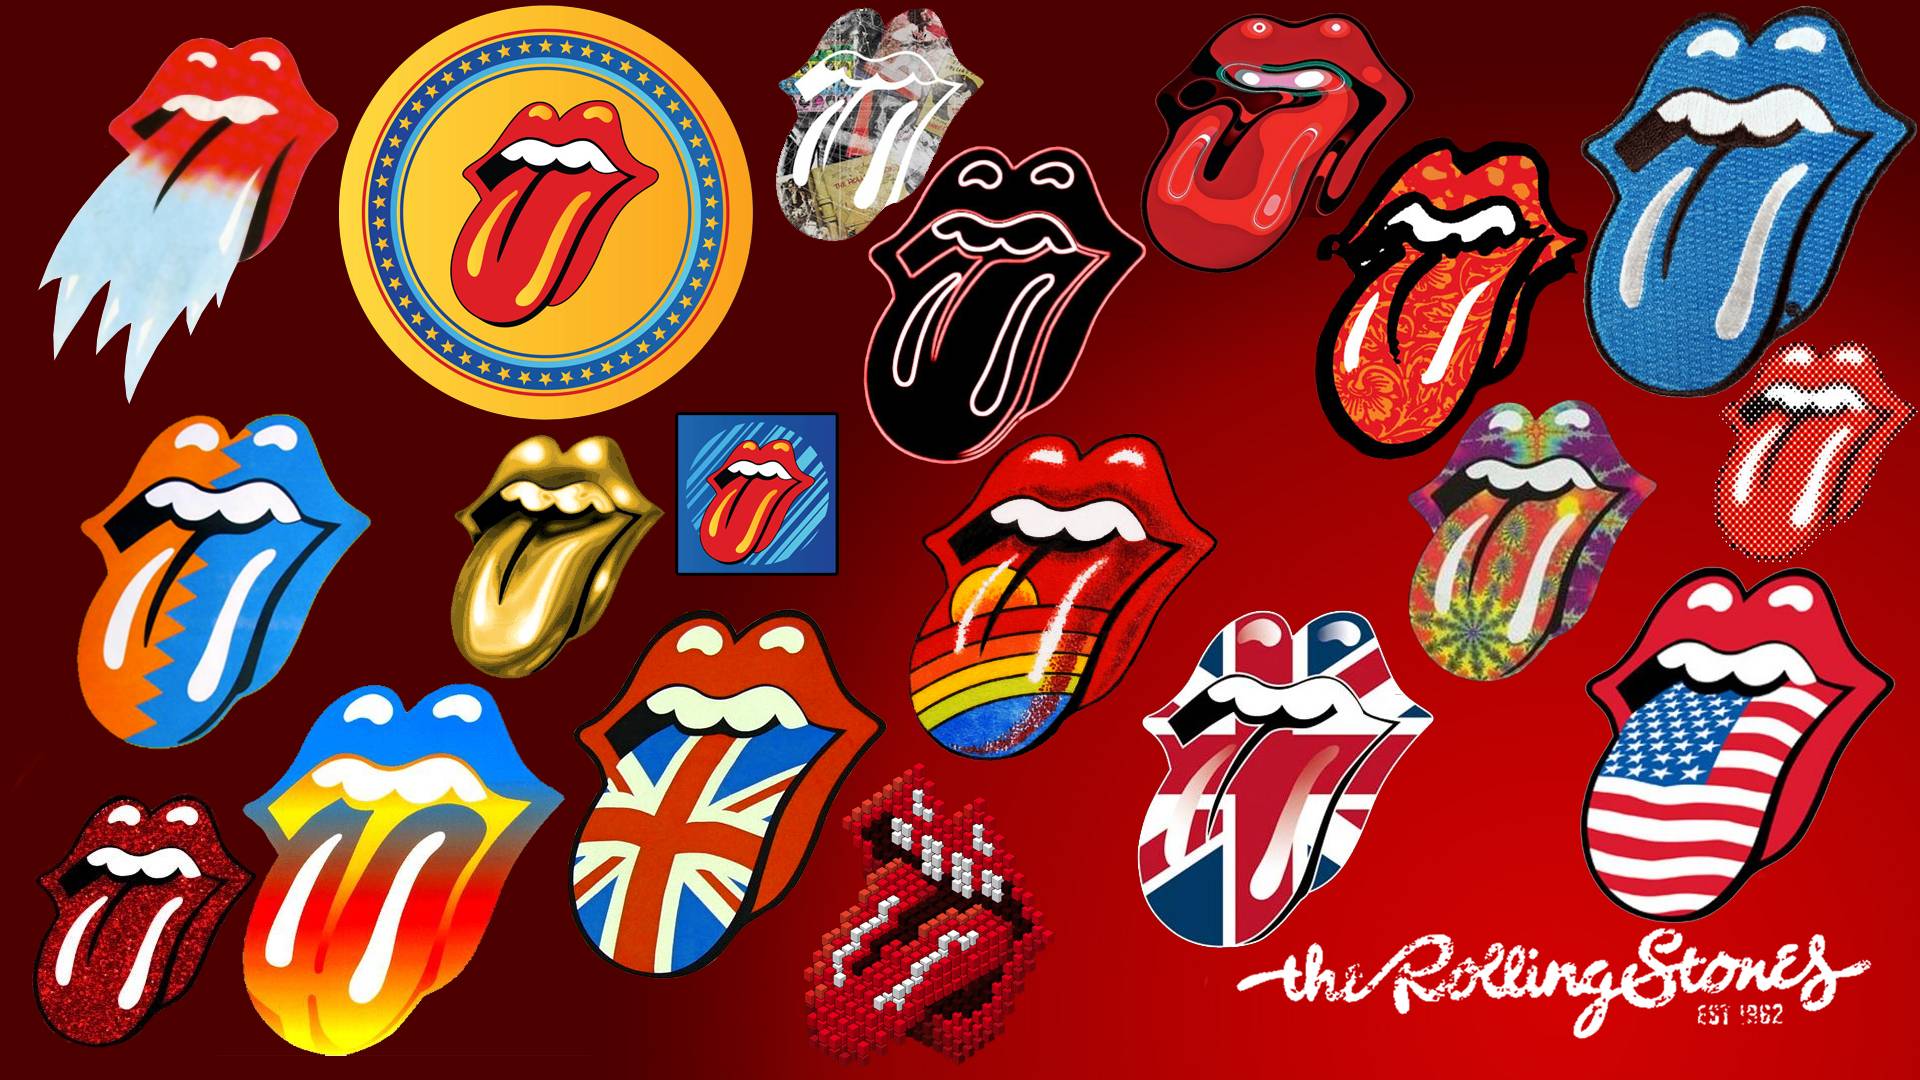 Wallpapers For > The Rolling Stones Wallpapers Iphone